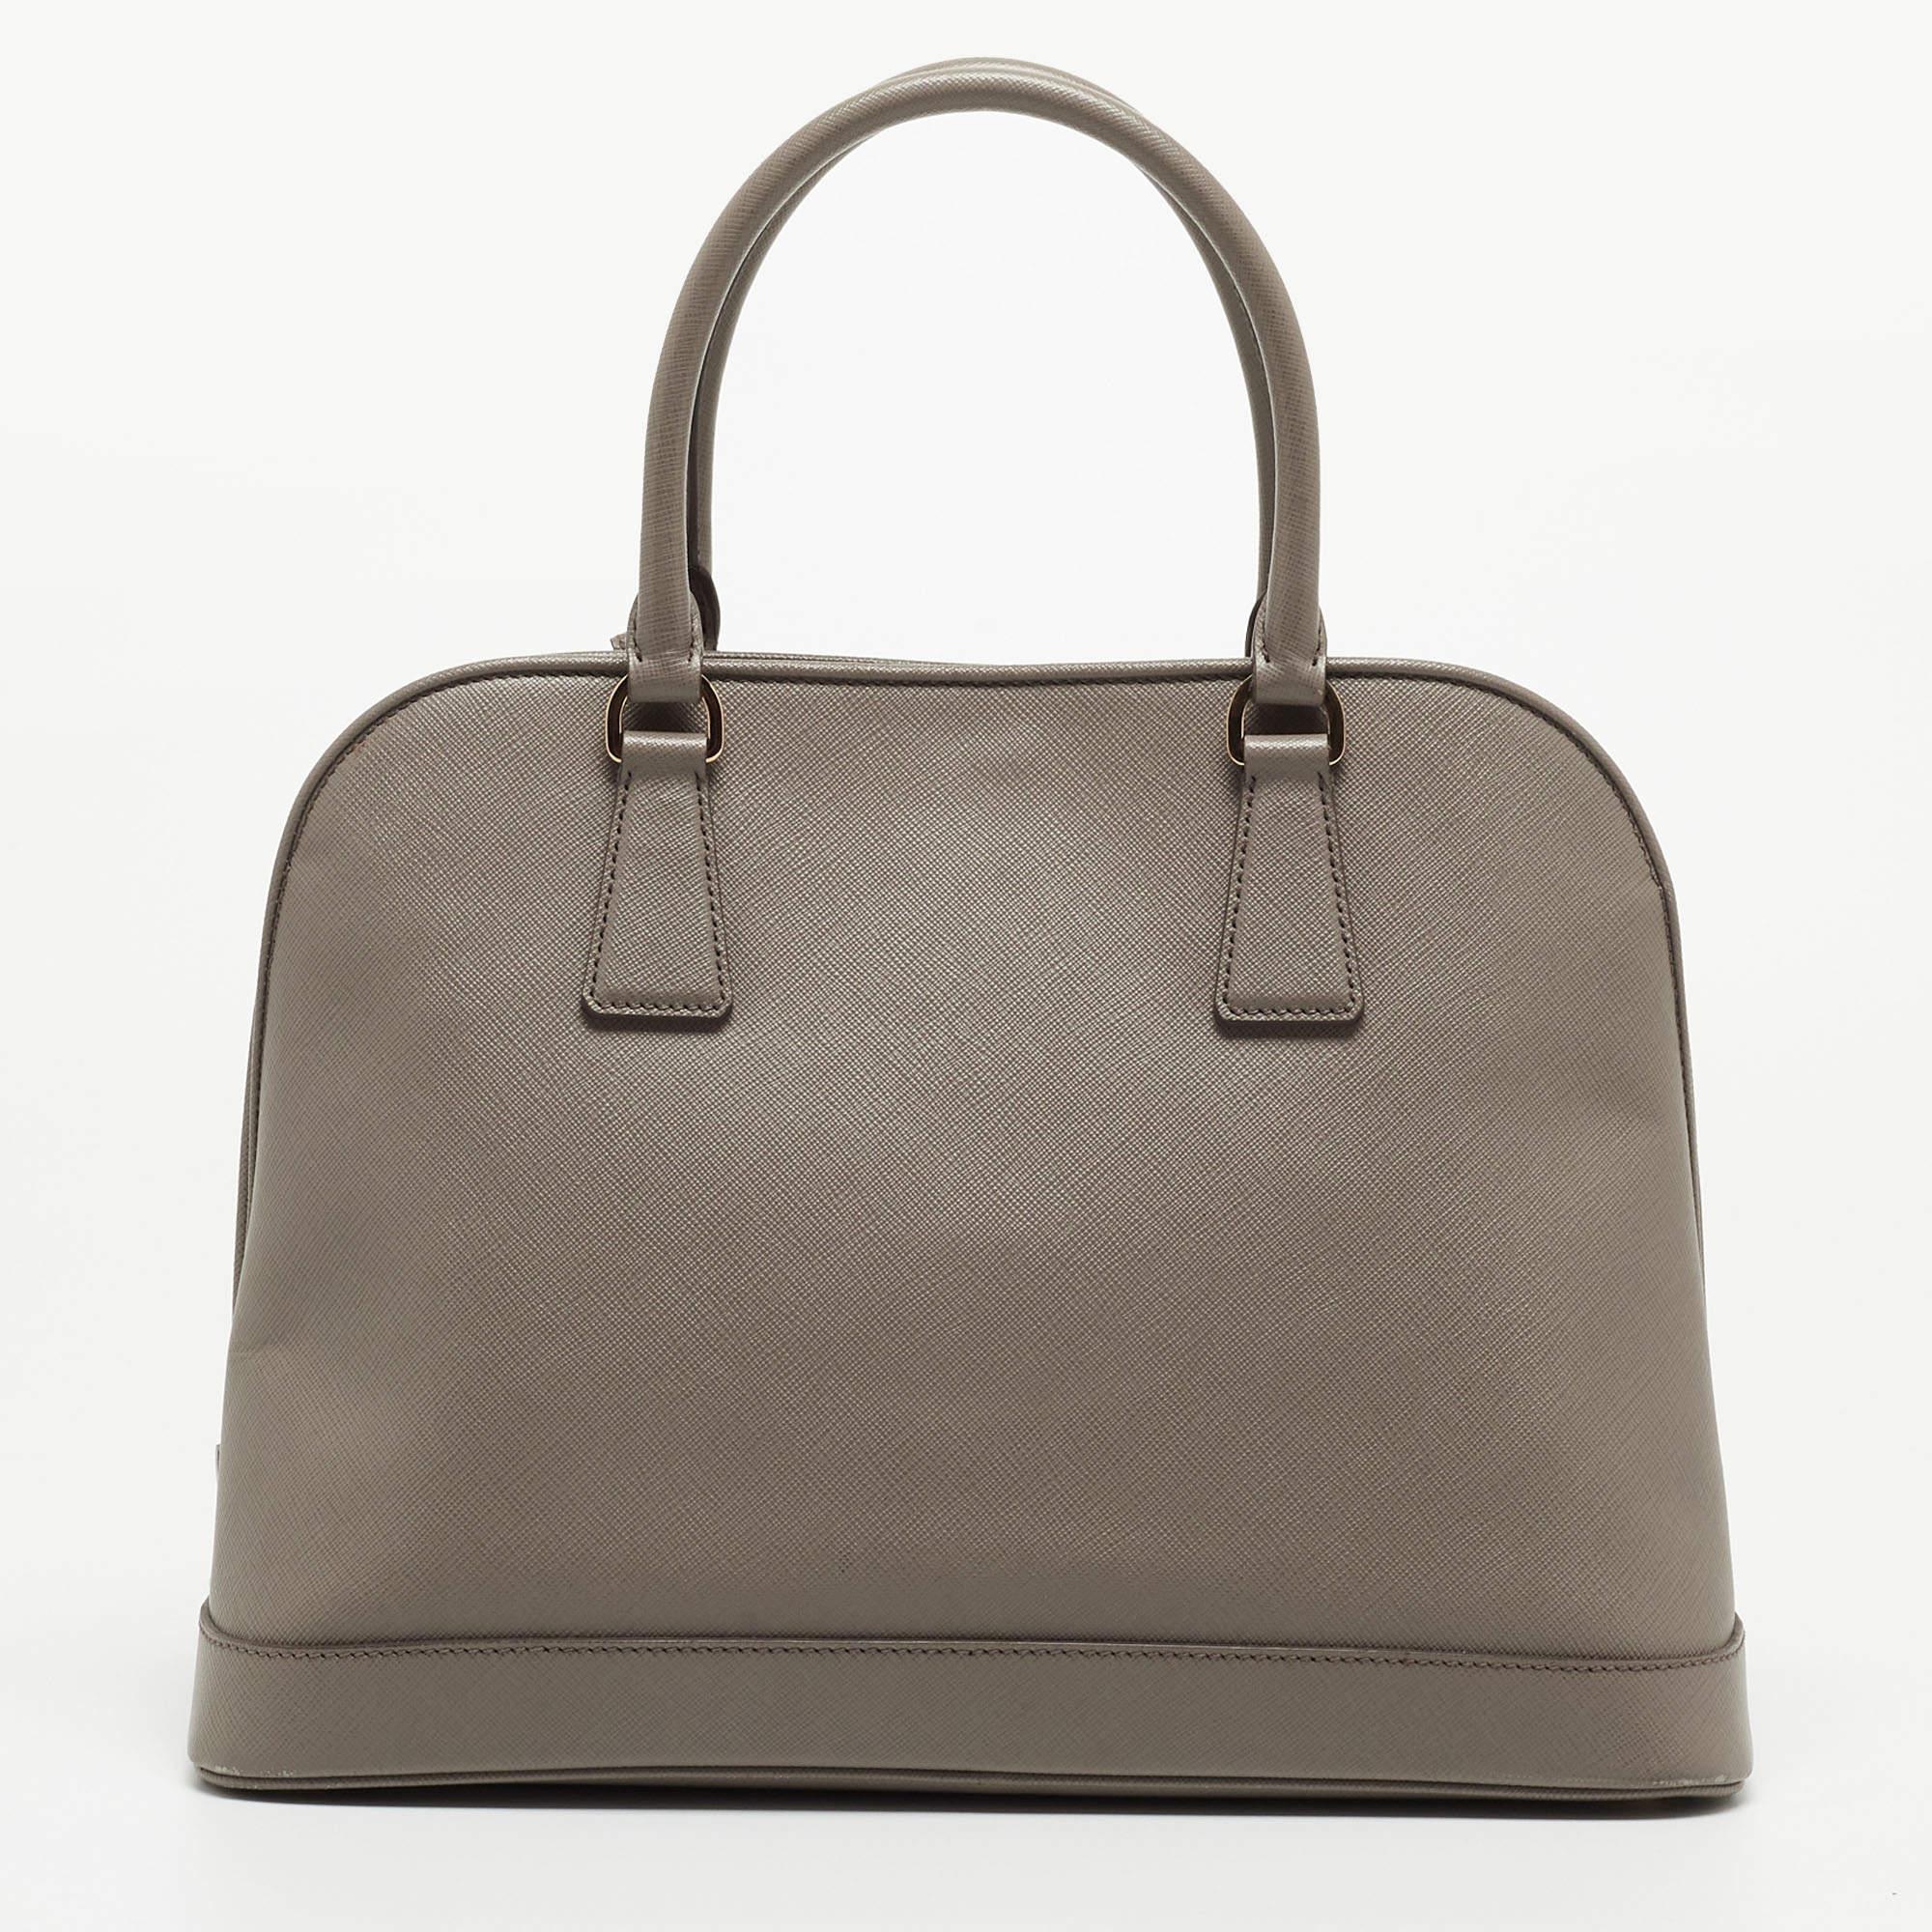 With a well-structured shape, this Prada bag embodies sophistication and style. Crafted from Saffiano lux leather, it flaunts top dual handles, a brand signature on the front, and gold-tone hardware. The nylon and leather lined interior is secured